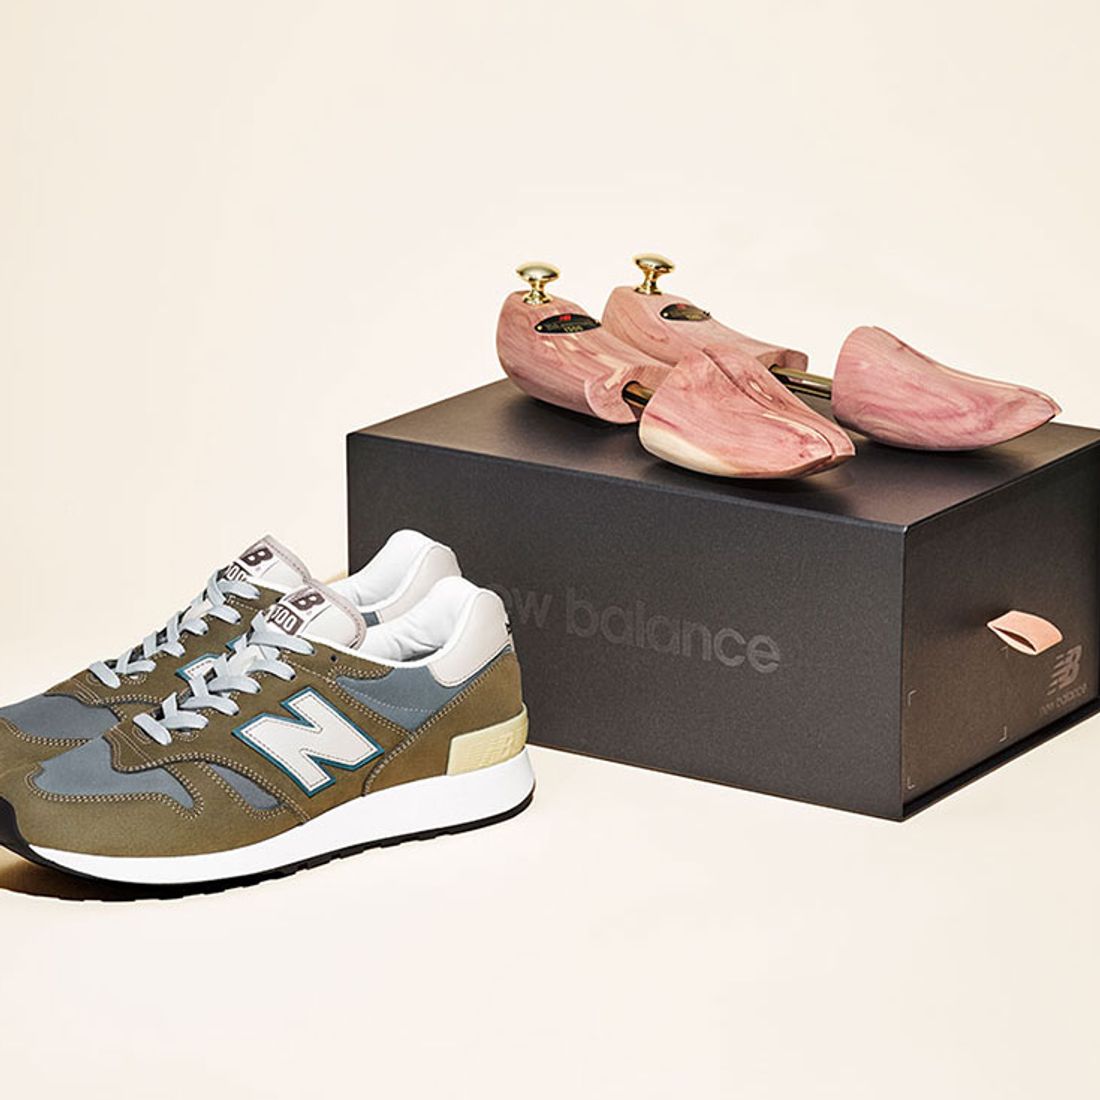 Mortgage Your Mortgage: New Balance 1300Jp Made In Japan - Sneaker Freaker